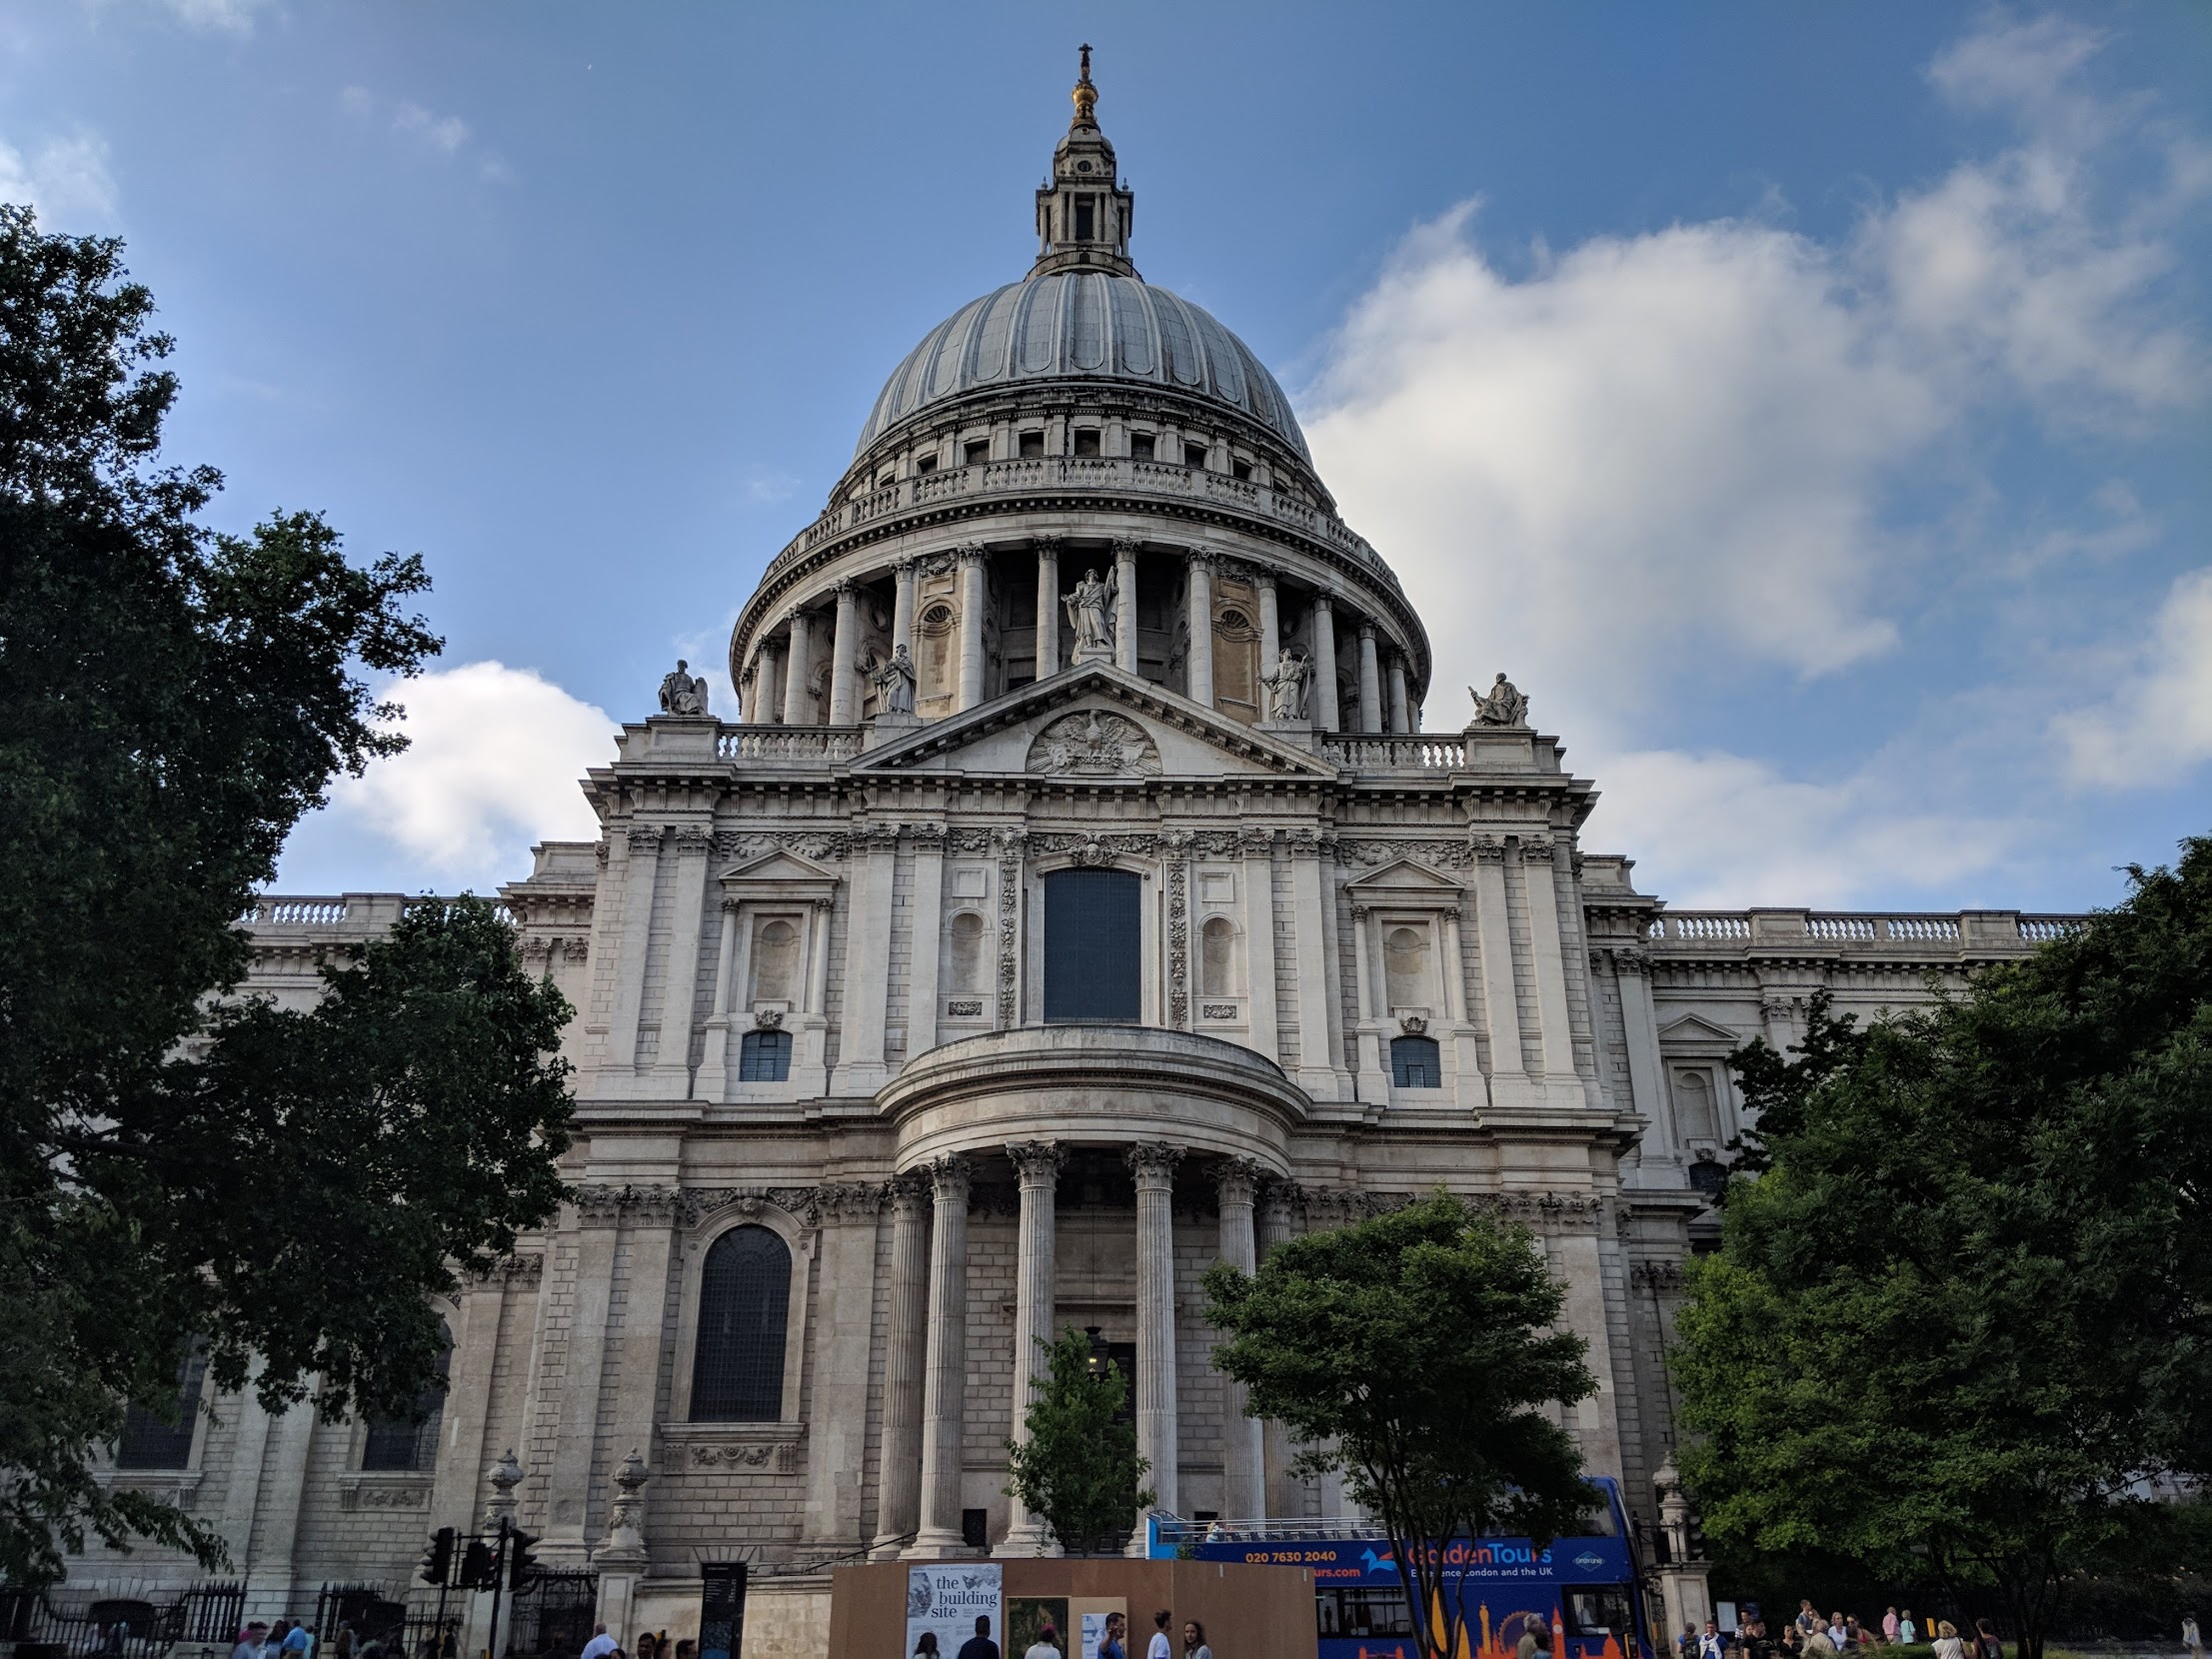 Saint Pauls Cathedral in London England